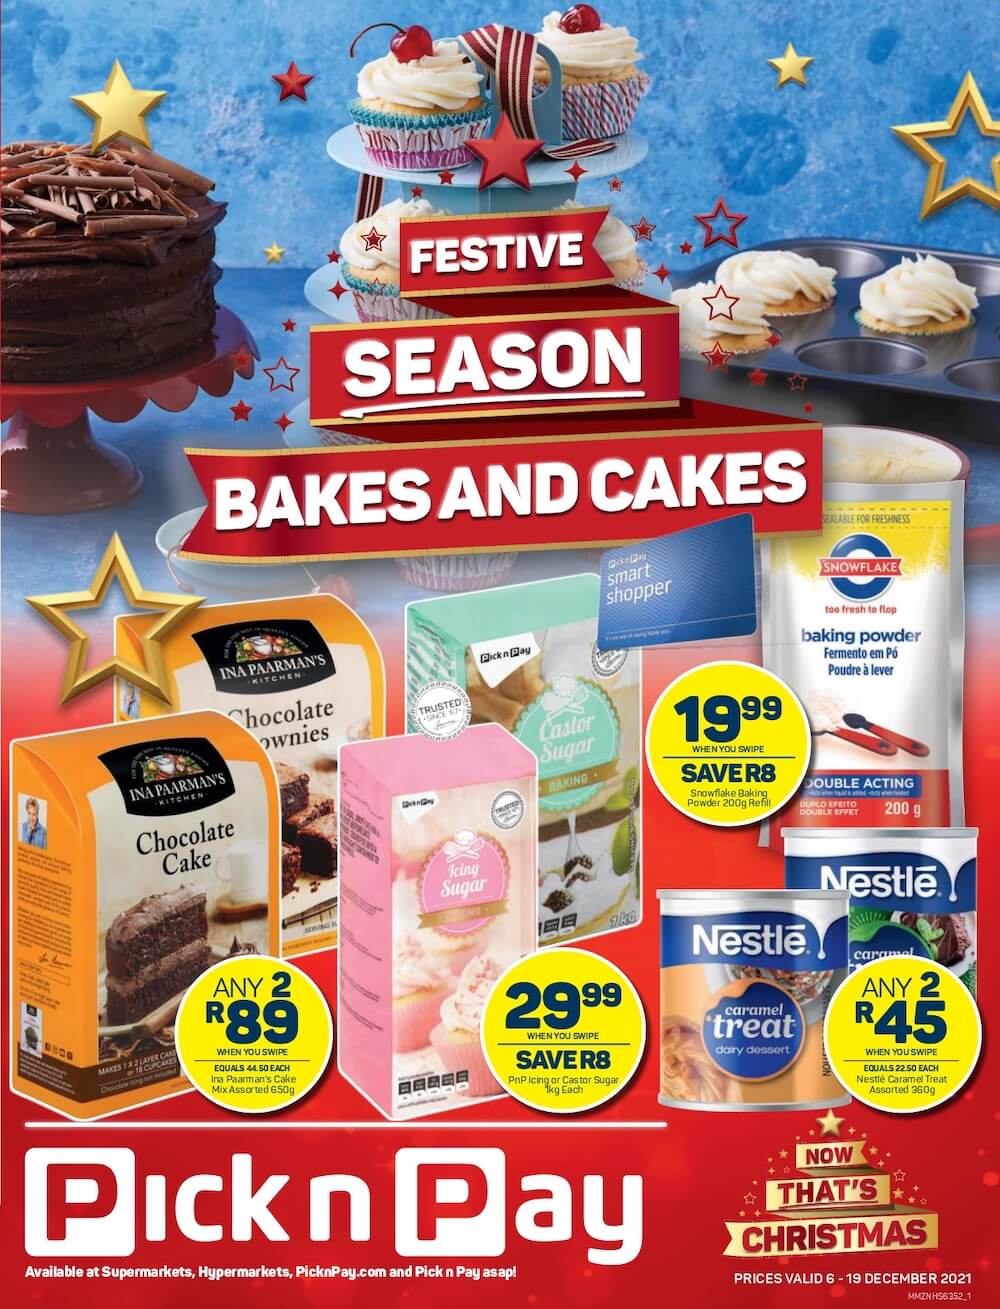 Pick n Pay Specials Christmas Baking 2021